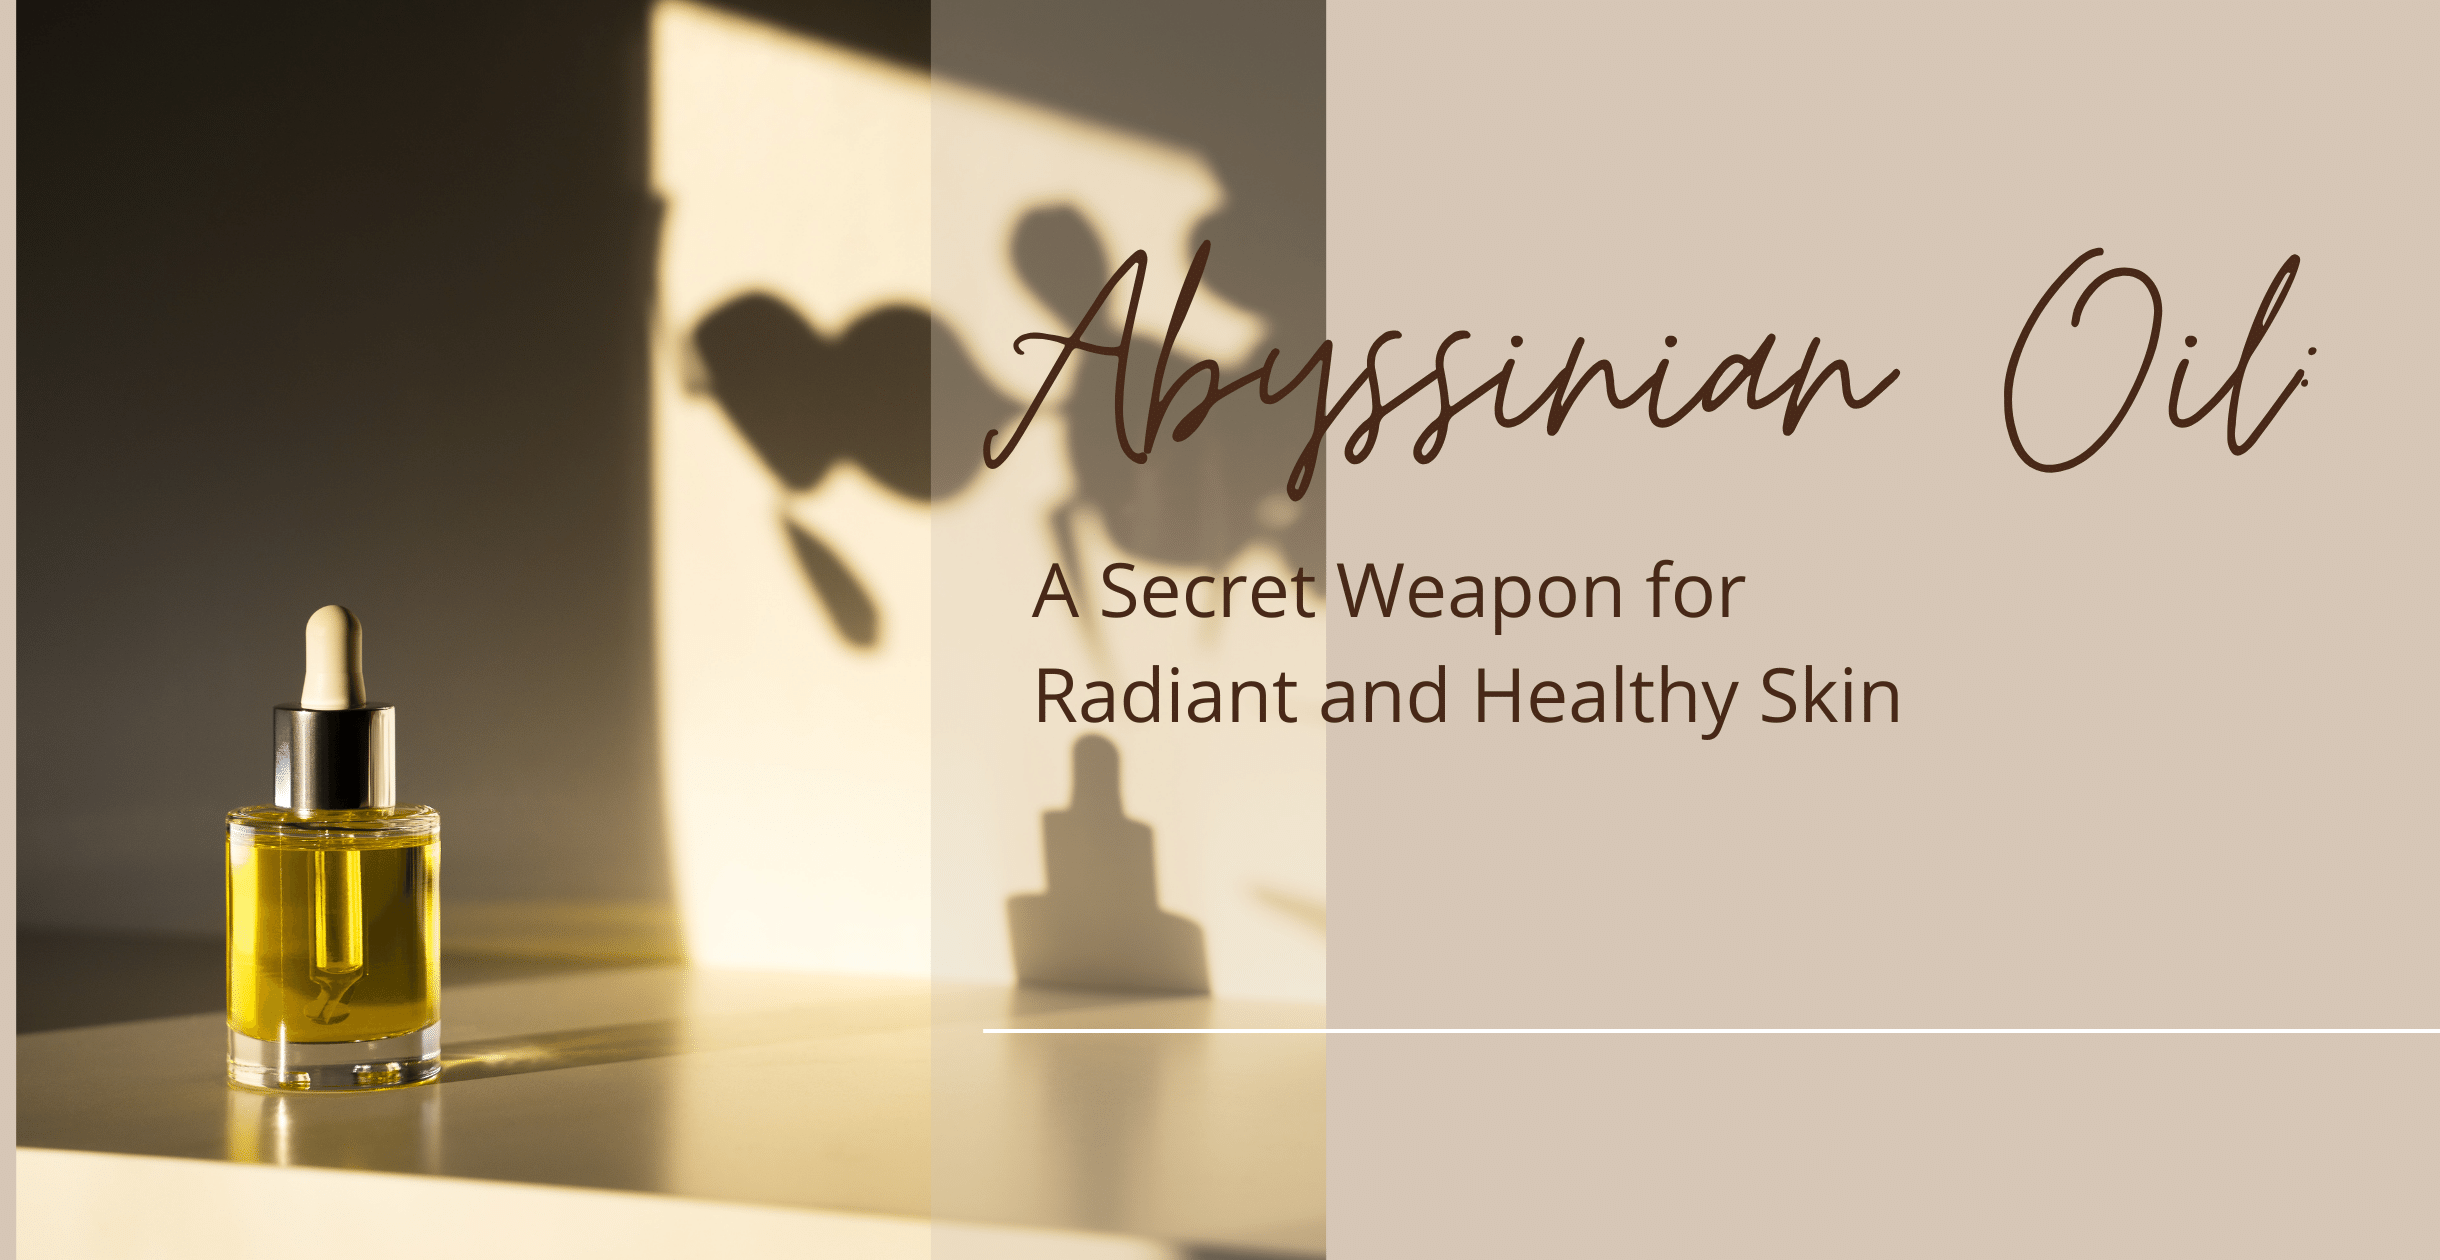 Abyssinian Oil: A Secret Weapon for Radiant and Healthy Skin